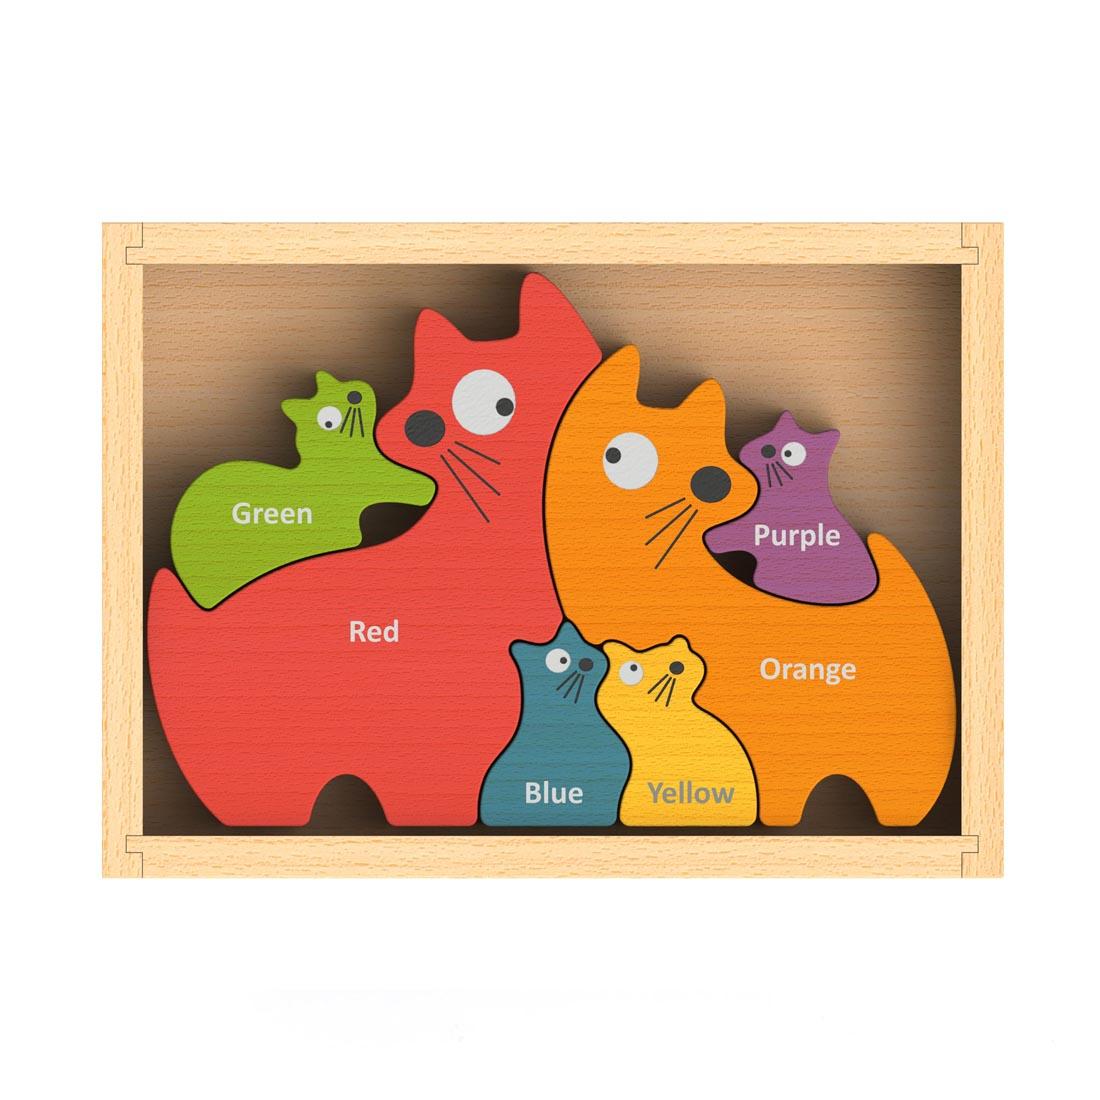 English Side of Cat Family Bilingual Color Puzzle by BeginAgain Toys